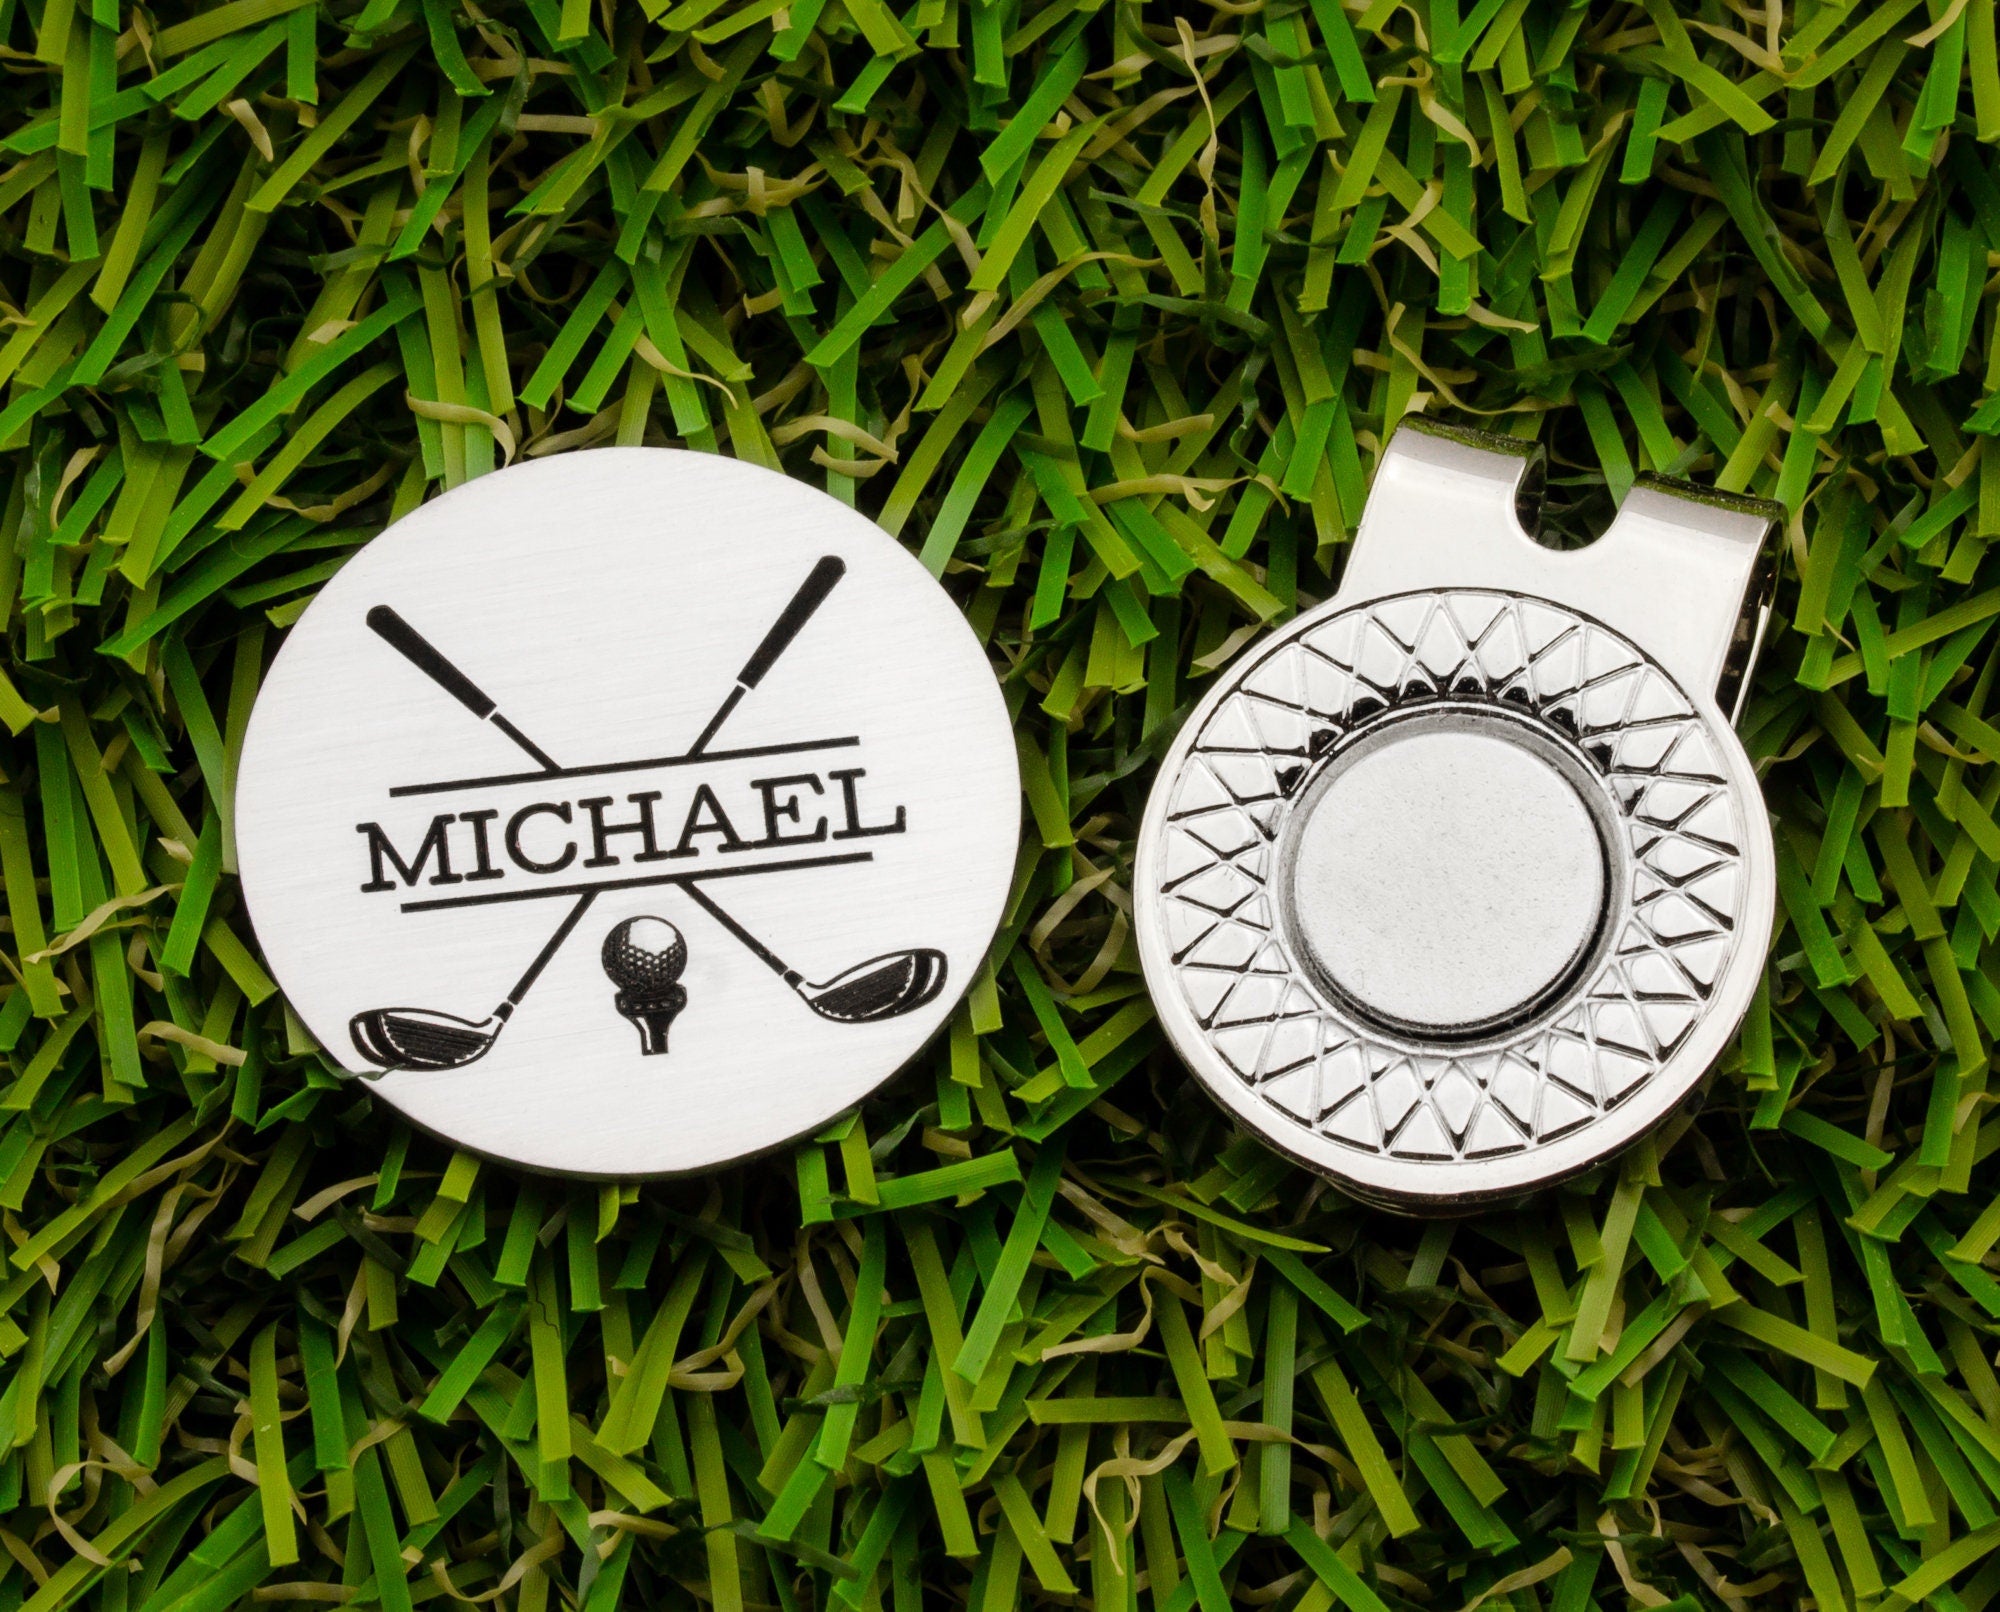 Golf Ball Marker Hat Clip Funny Golf Marker, Best Golf Gifts for Men and  Women